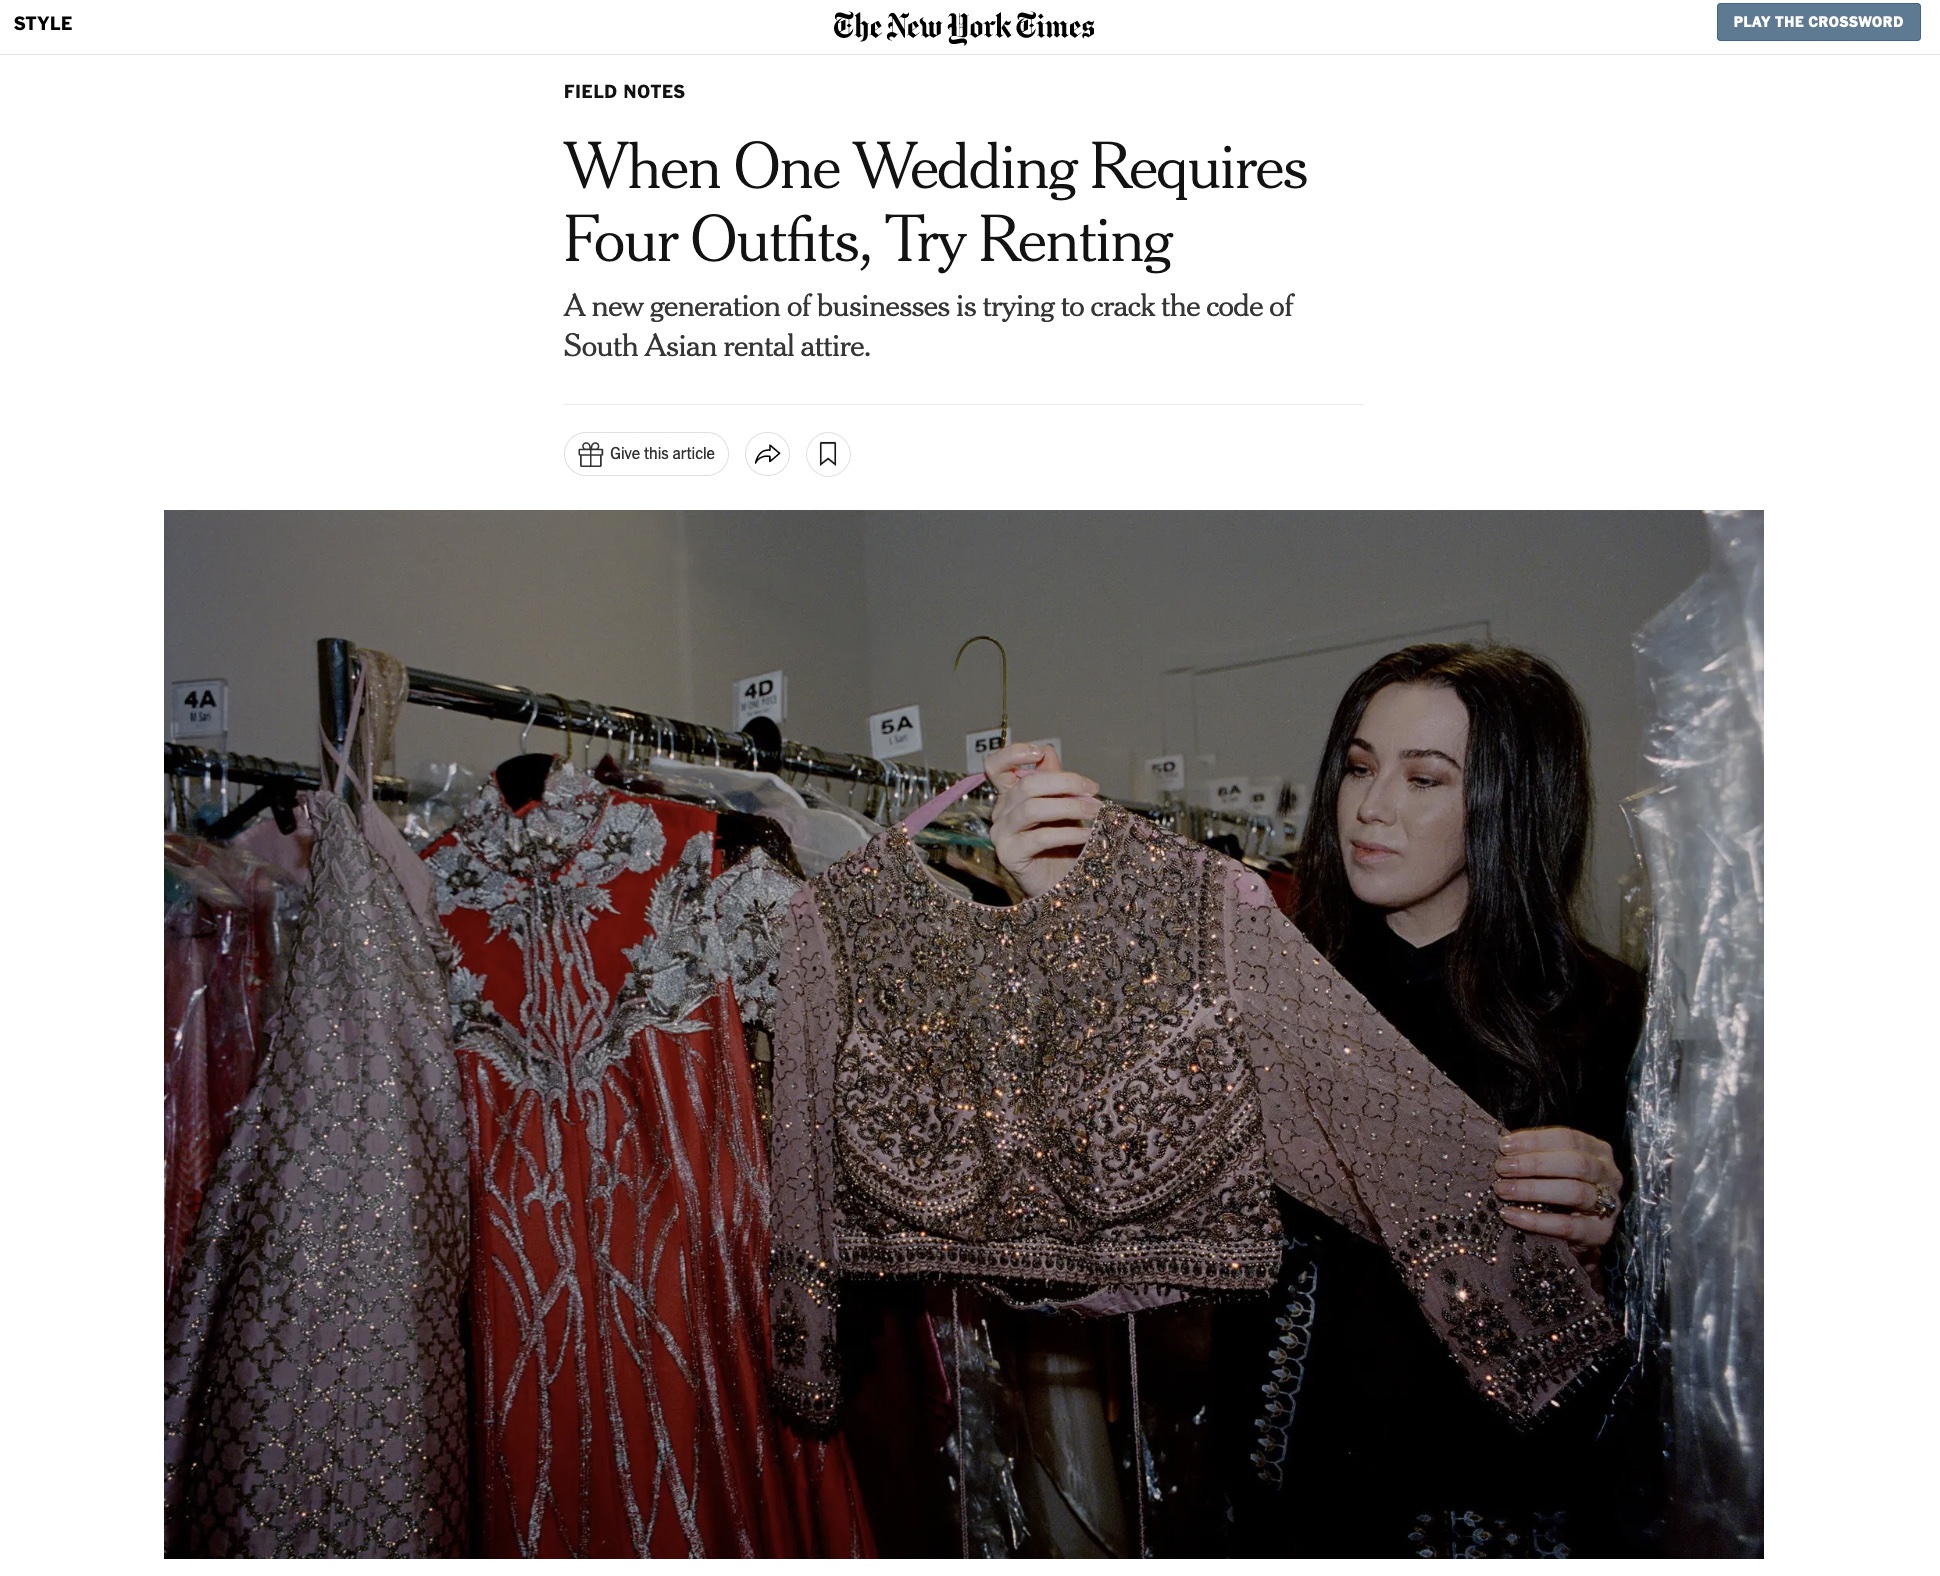 New York Times: When One Wedding Requires Four Outfits, Try Renting